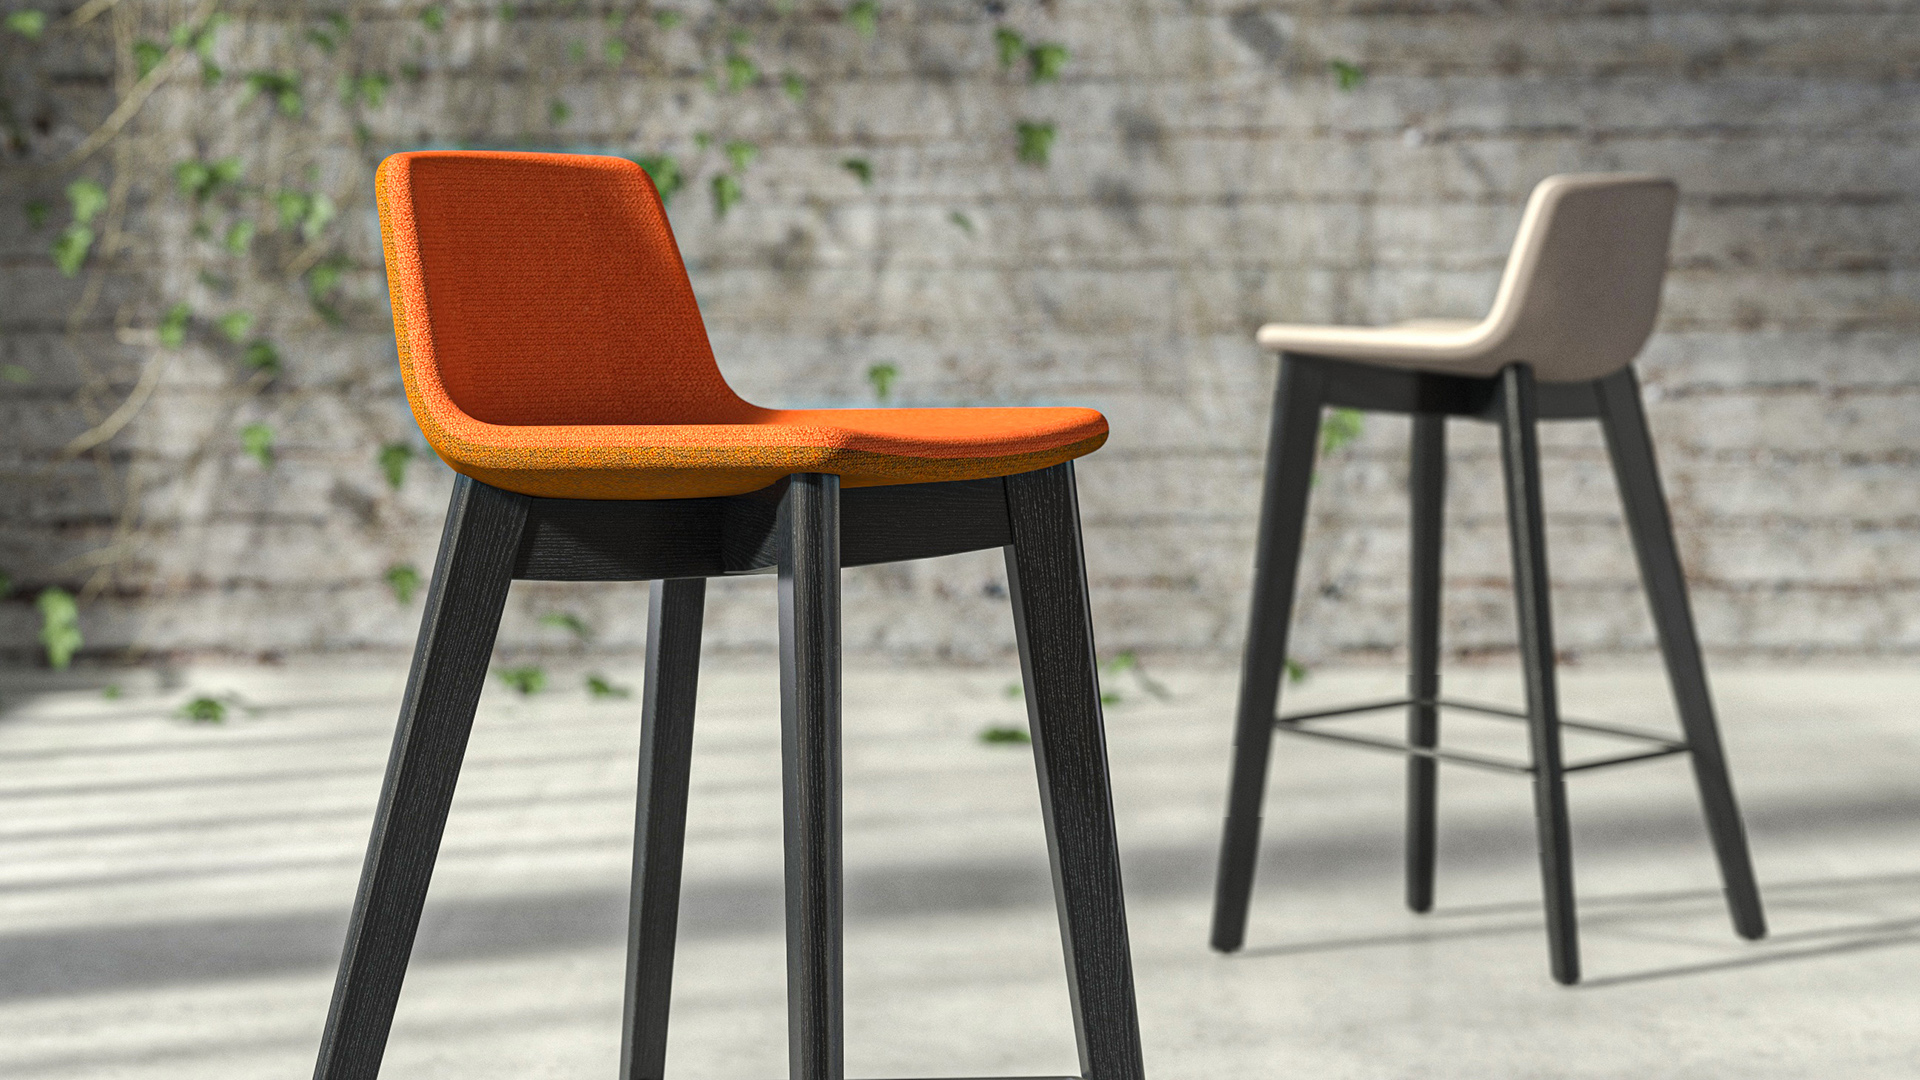 Twist &amp; Sit upholstered stools with black ash wooden legs